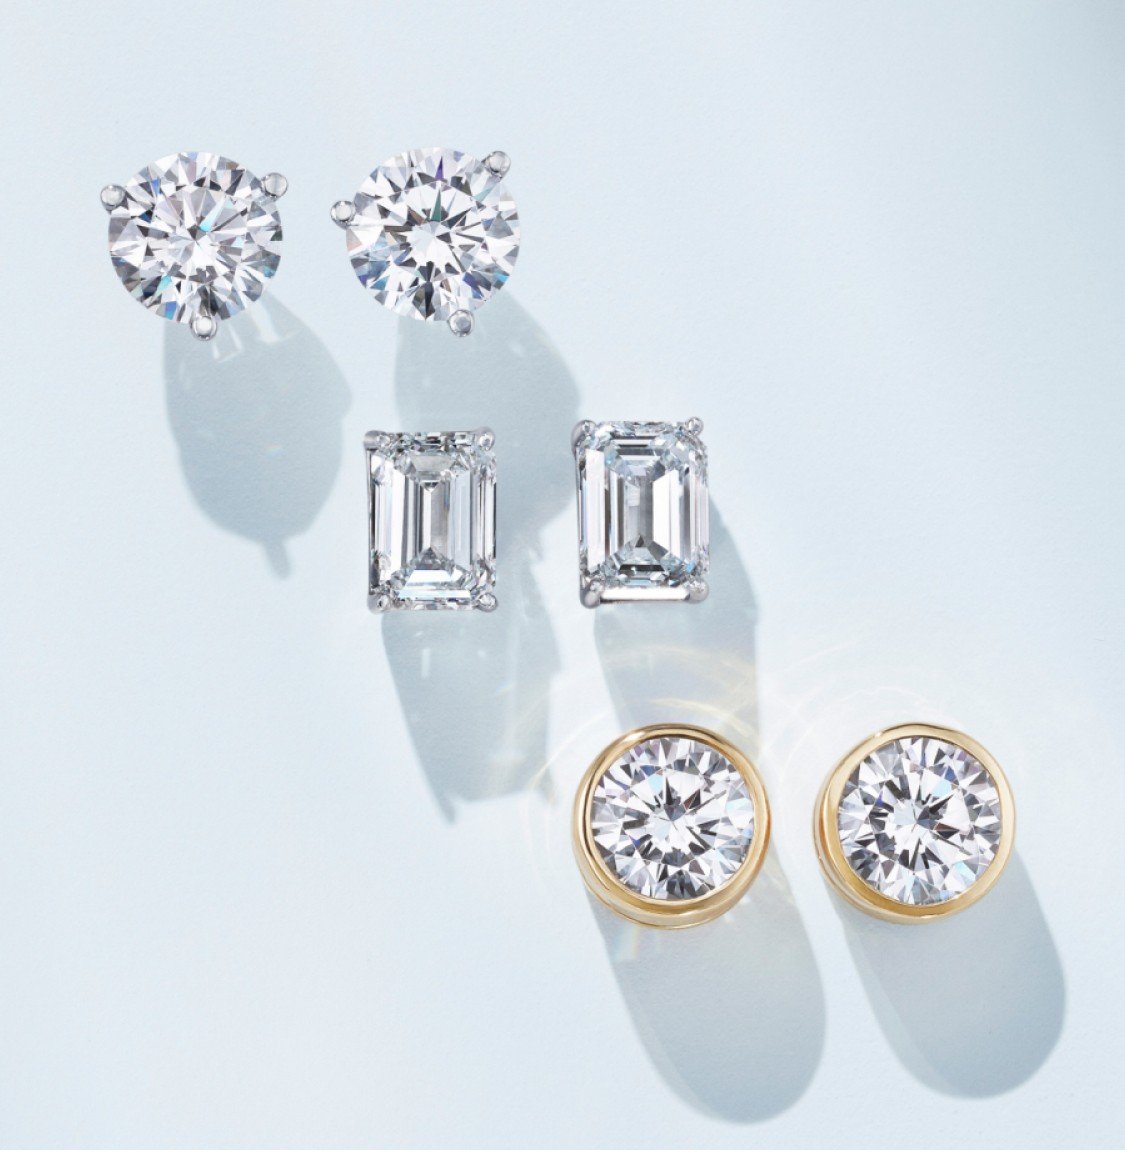 Assortment of diamond earrings in a variety of settings